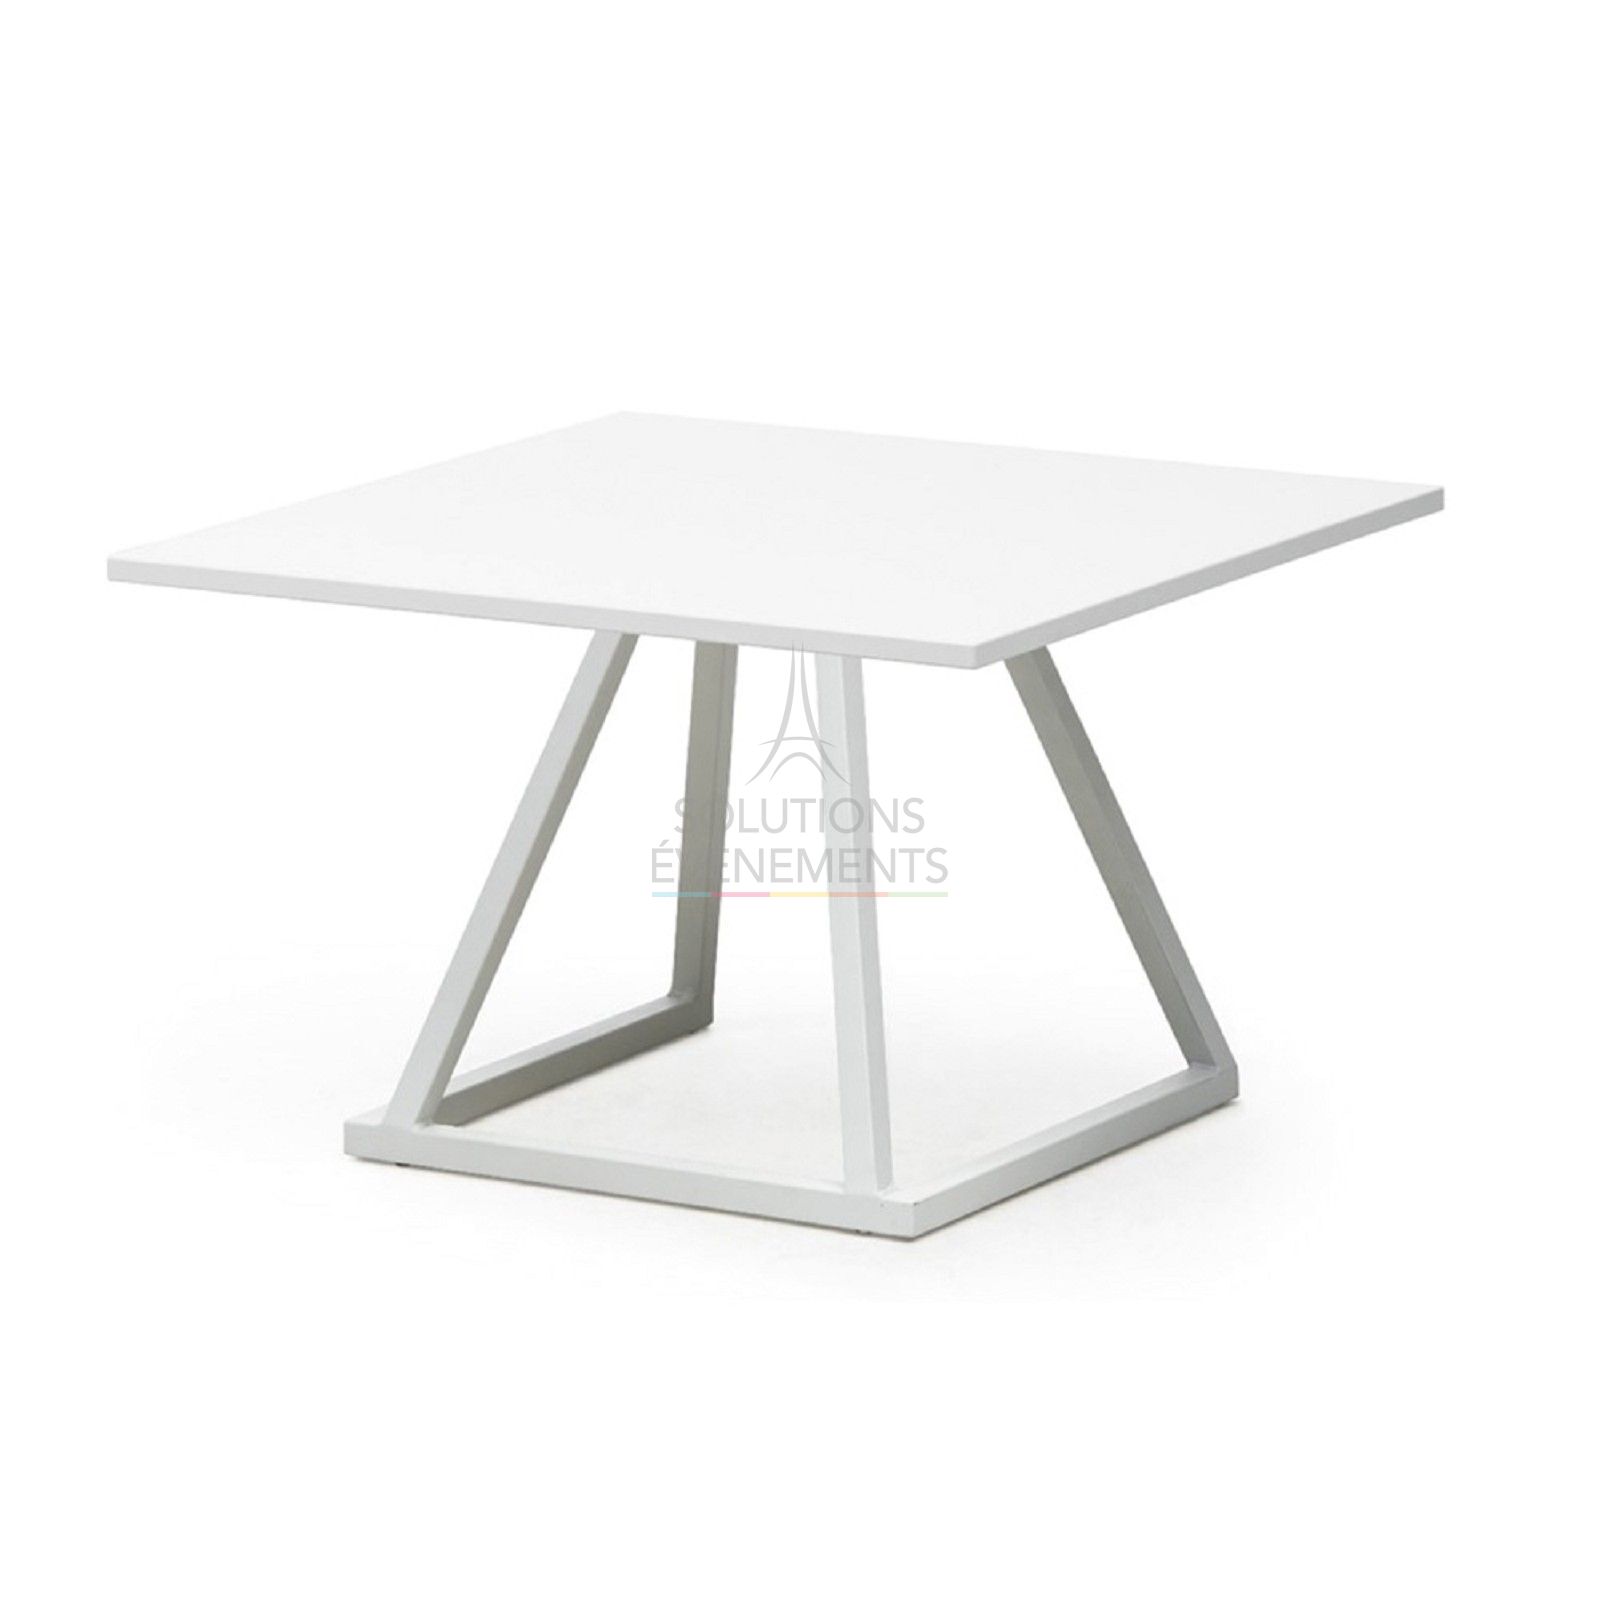 Rental of small Linea lounge coffee table with square top.